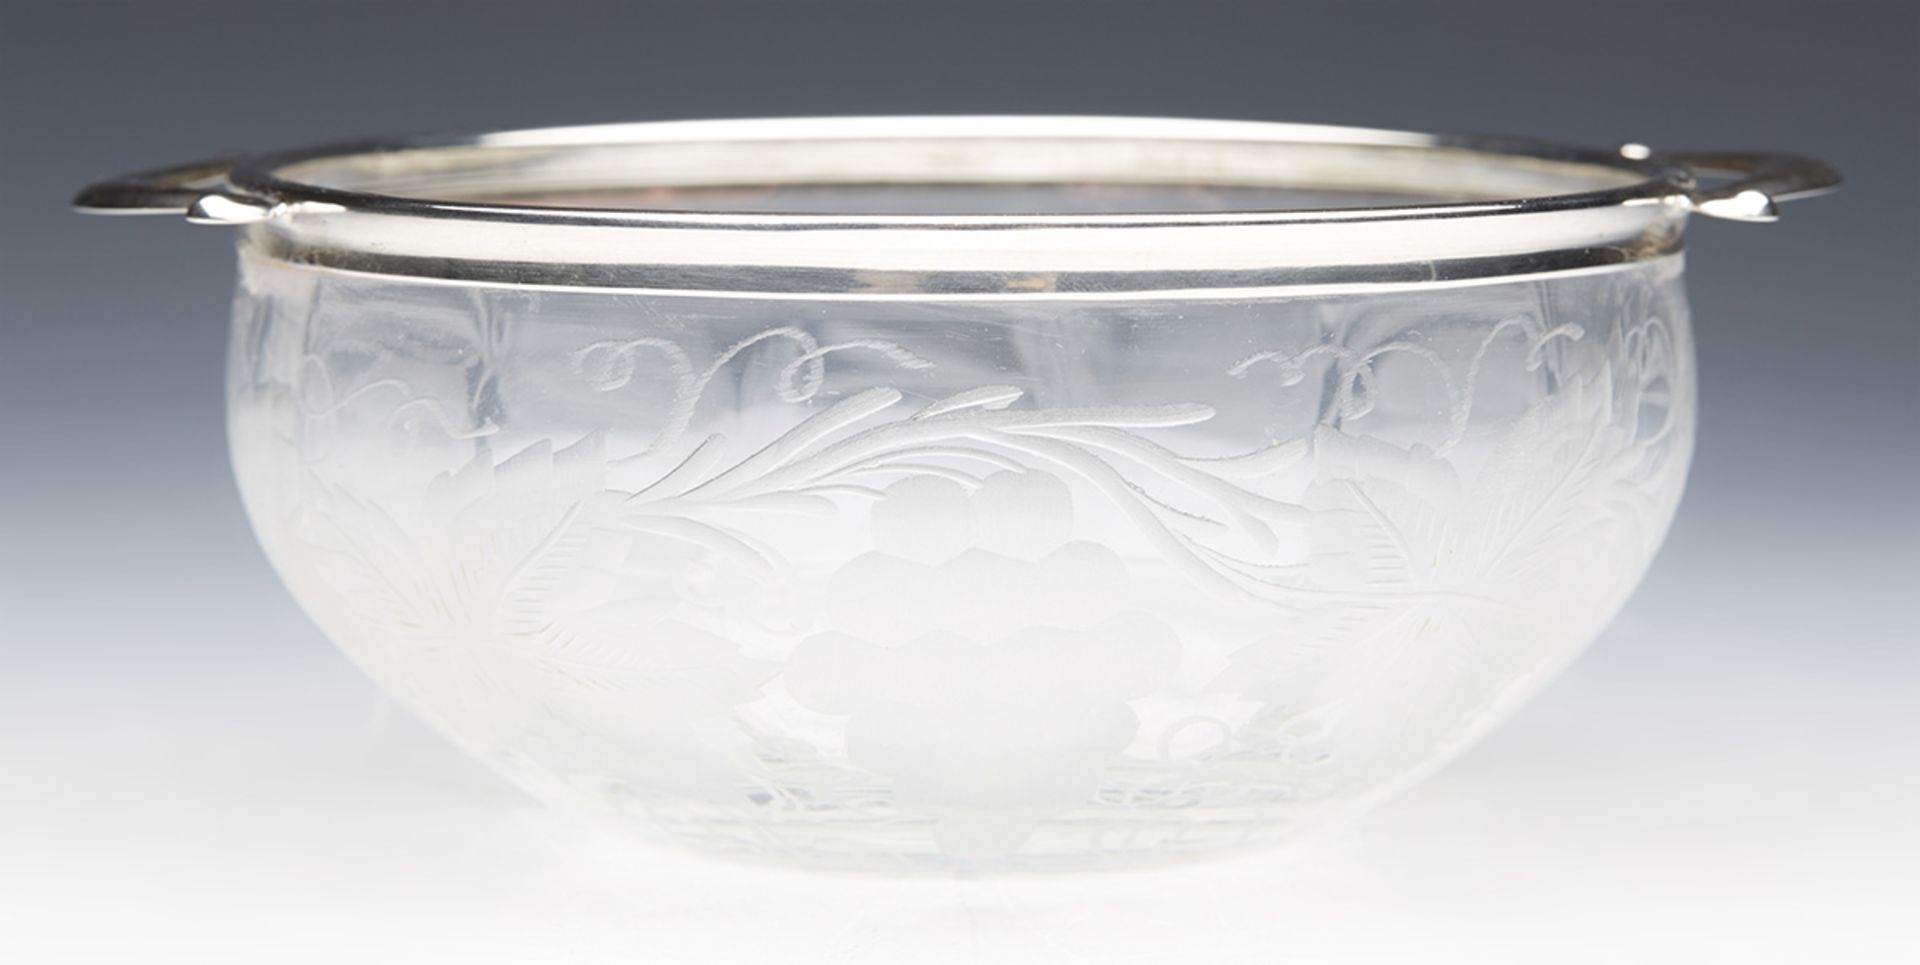 Fine Antique American Silver Mounted Engraved Glass Bowl 19Th C. - Image 9 of 9